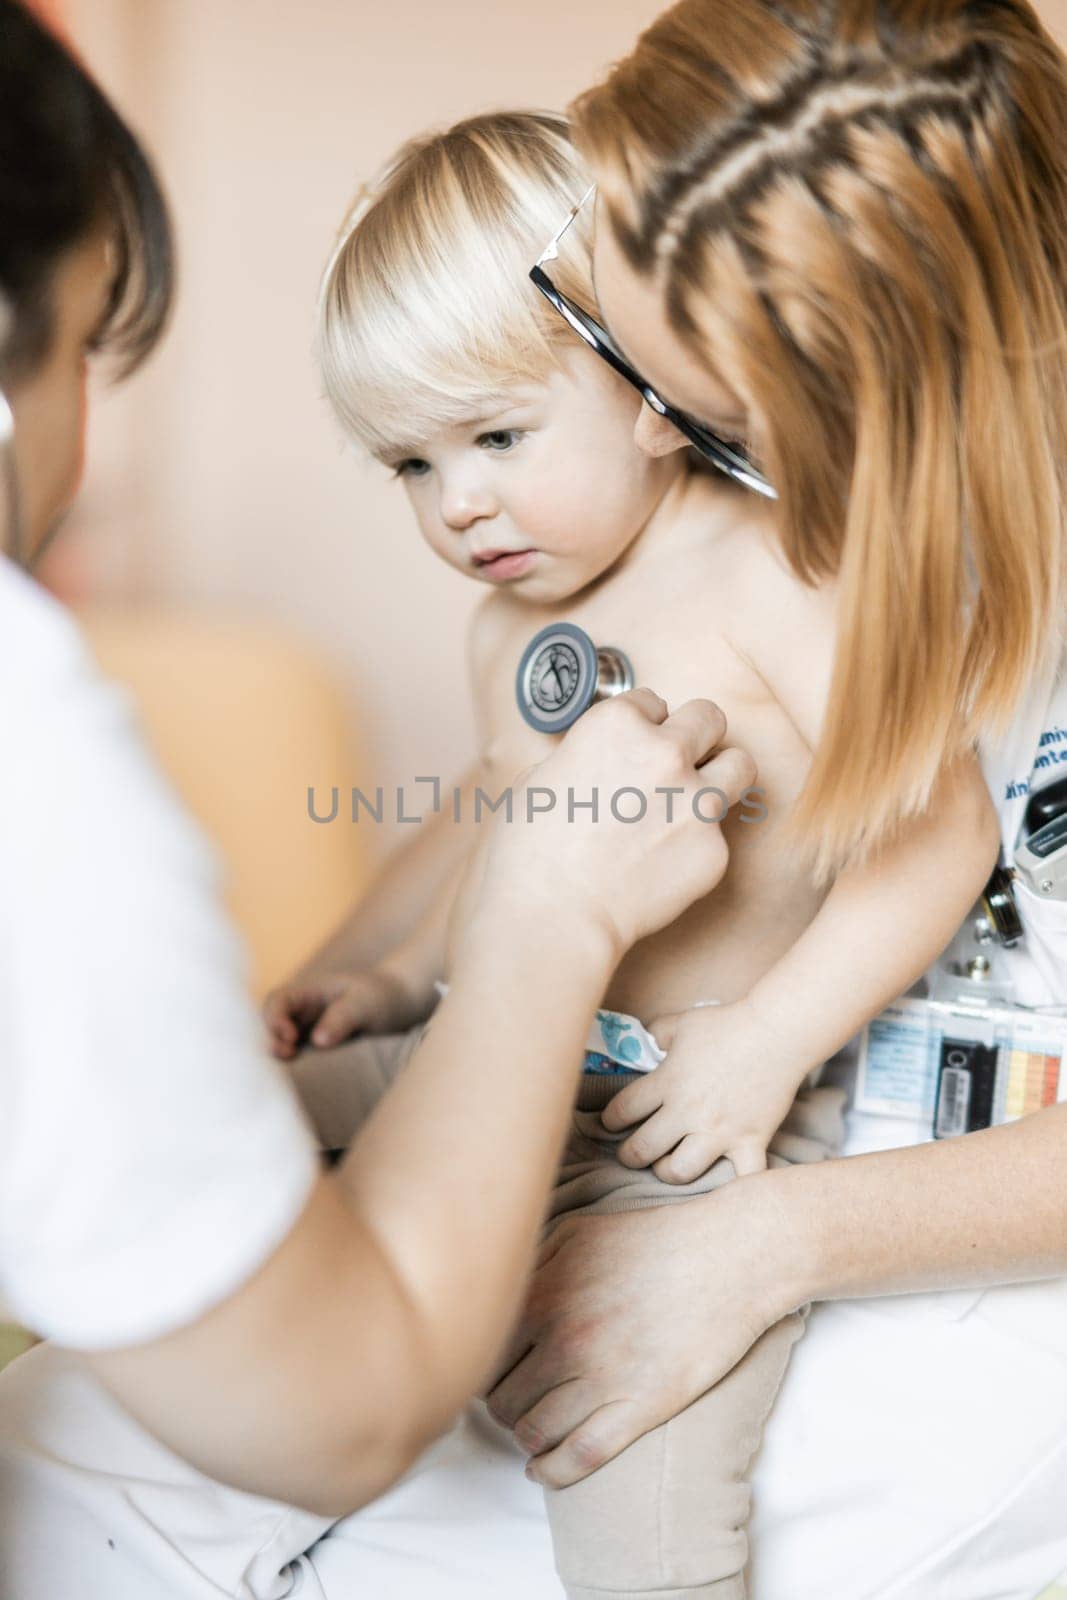 Doctor holding stethoscope and listening to child's heartbeat. Regular checkout at pediatrician at clinic or hospital. Healthcare and medical concept. by kasto